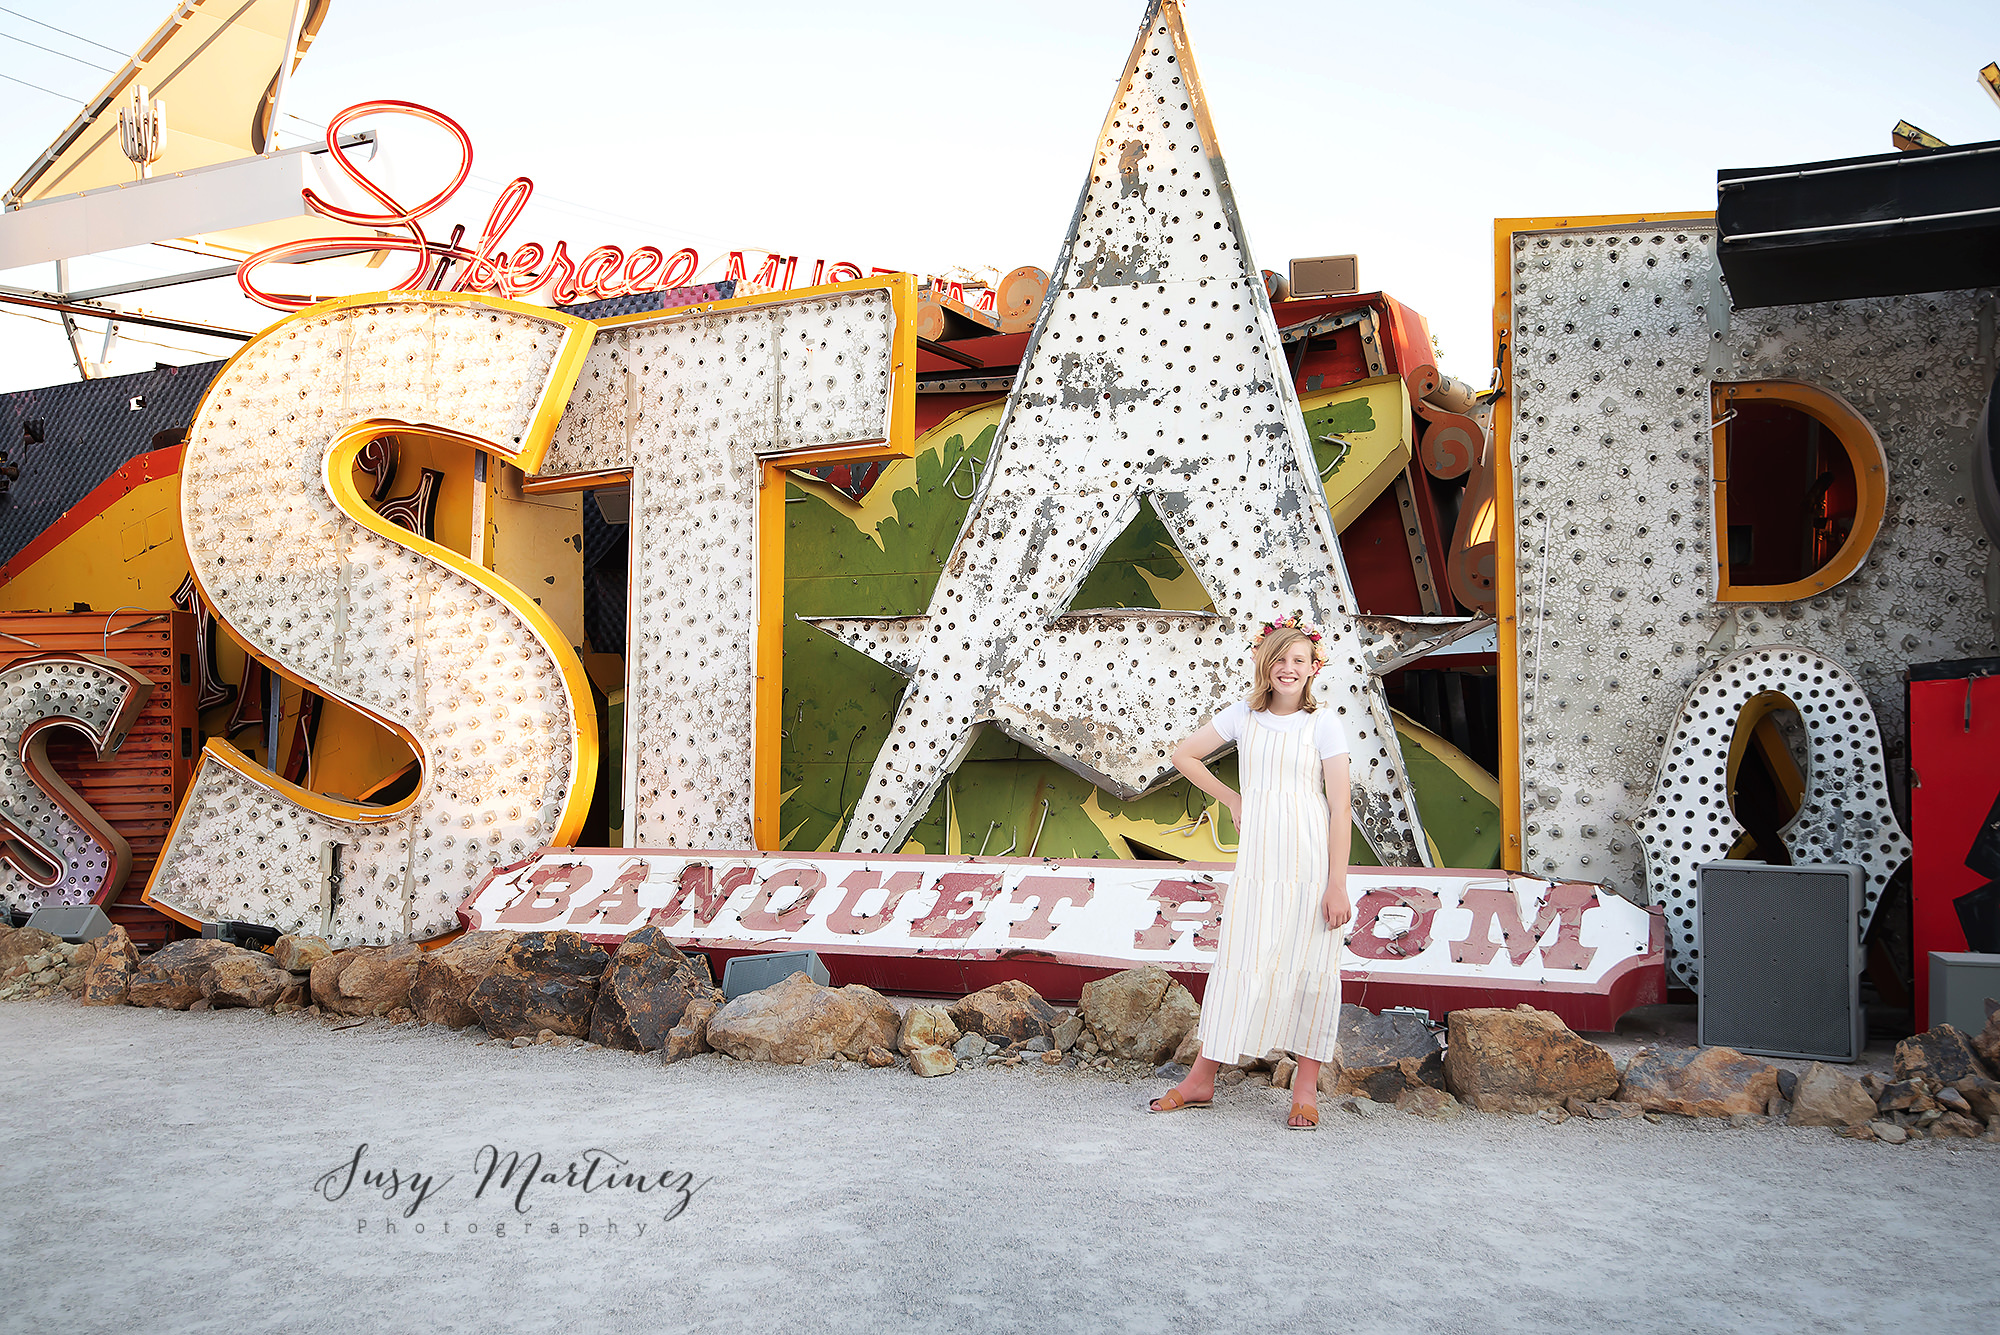 young girl in tan dress poses in front of STAR sign in Neon Boneyard